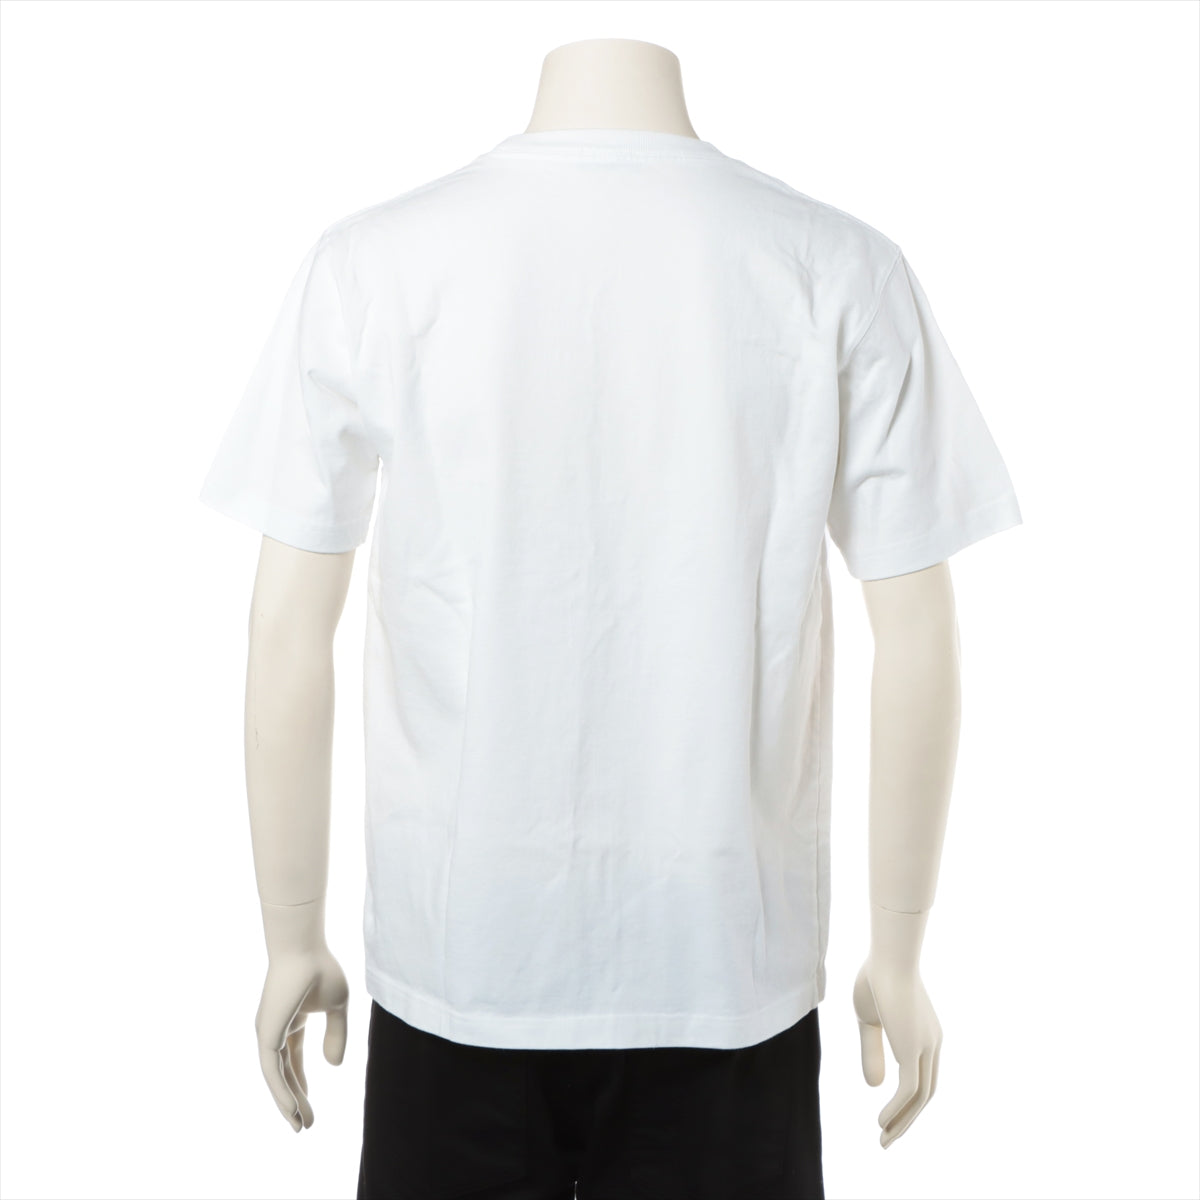 DIOR 23SS Cotton & polyester T-shirt S Men's White  313J696A0554 relaxed fit